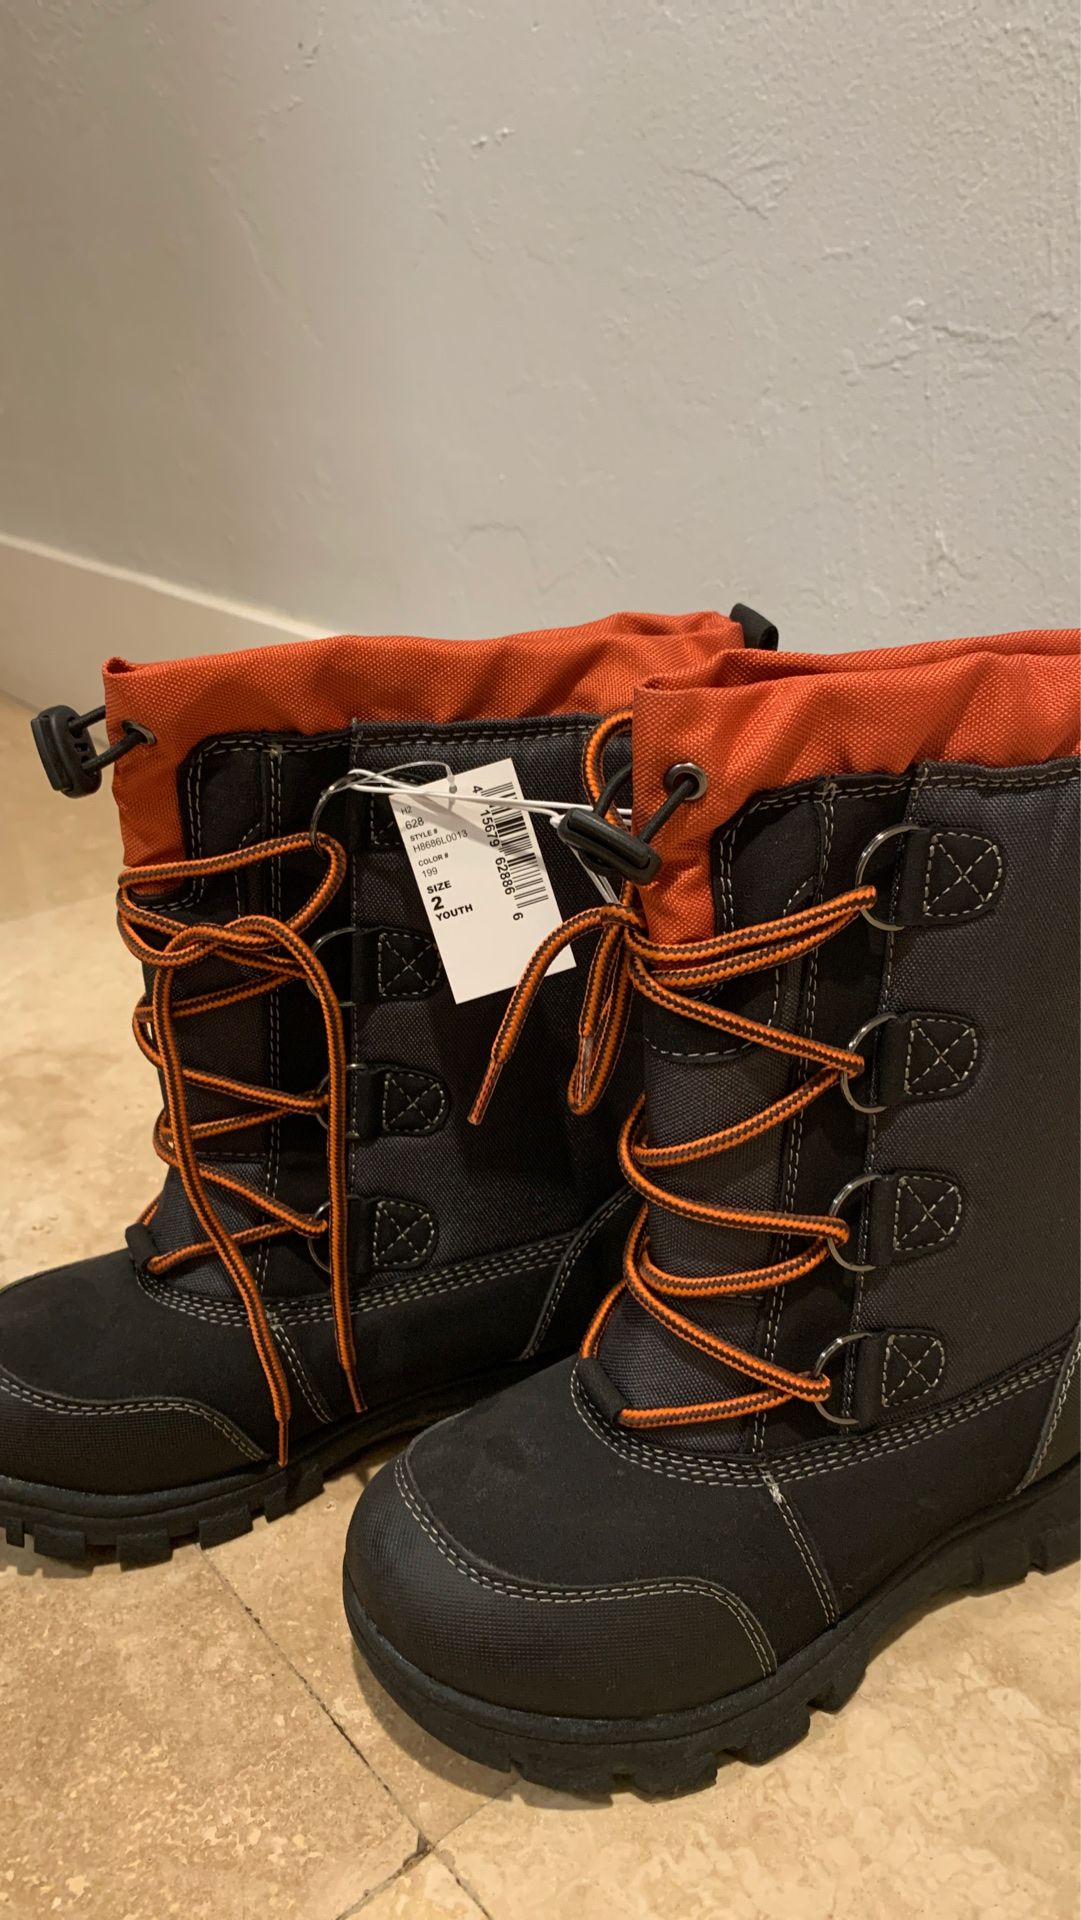 Kids boots size 2